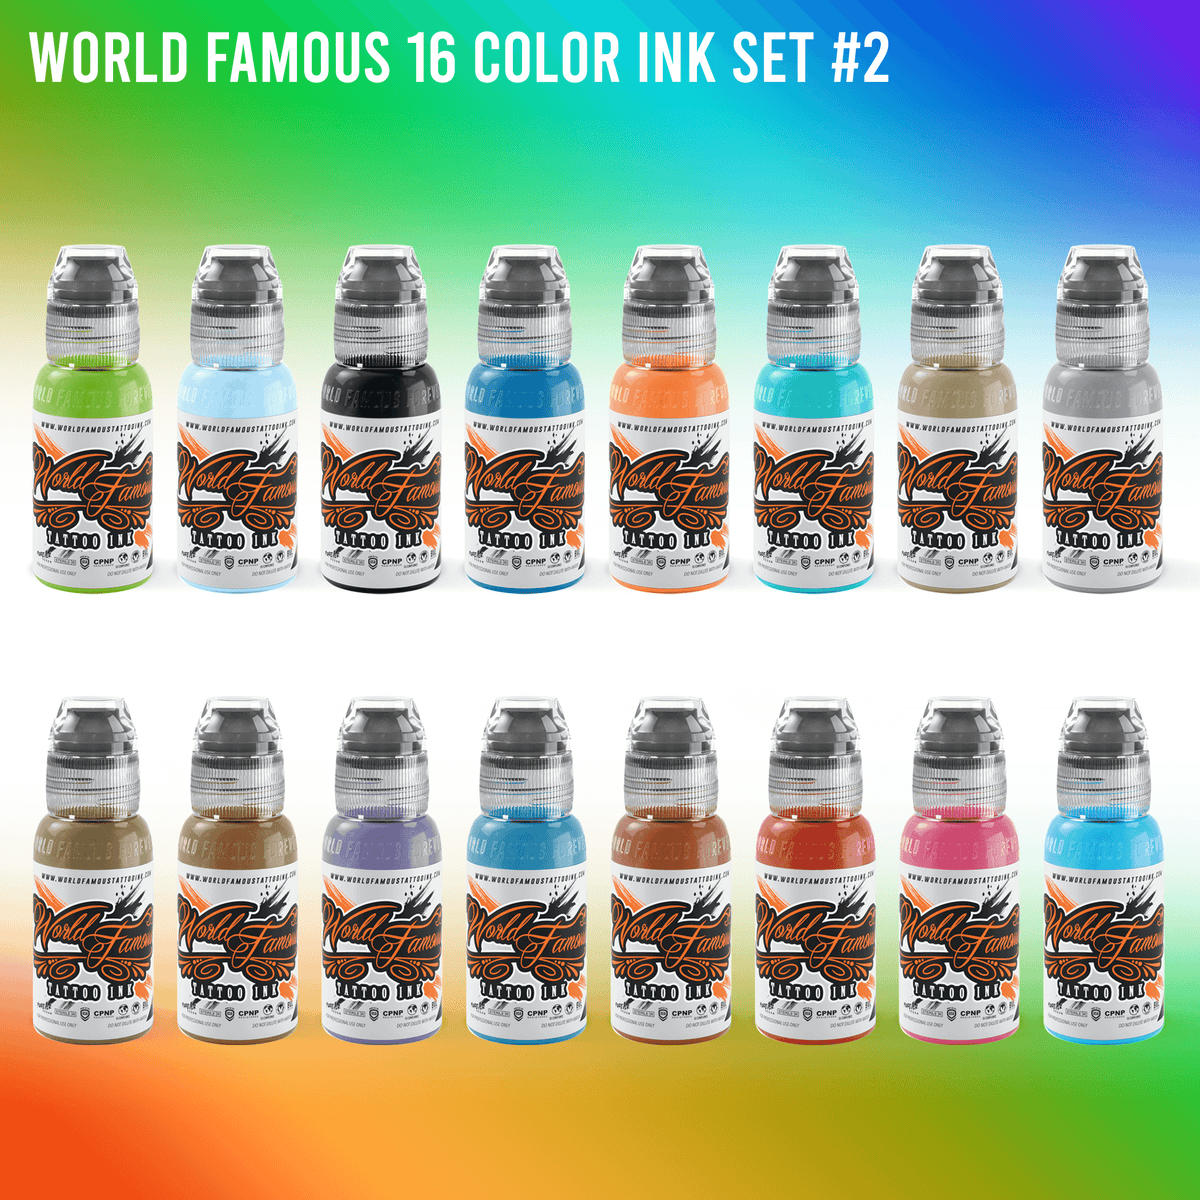 World Famous Tattoo Ink - 16 Color Tattoo Kit #1 - Professional Tattoo Ink  in Color Assortment, Includes White Tattoo Ink - Skin-Safe Permanent